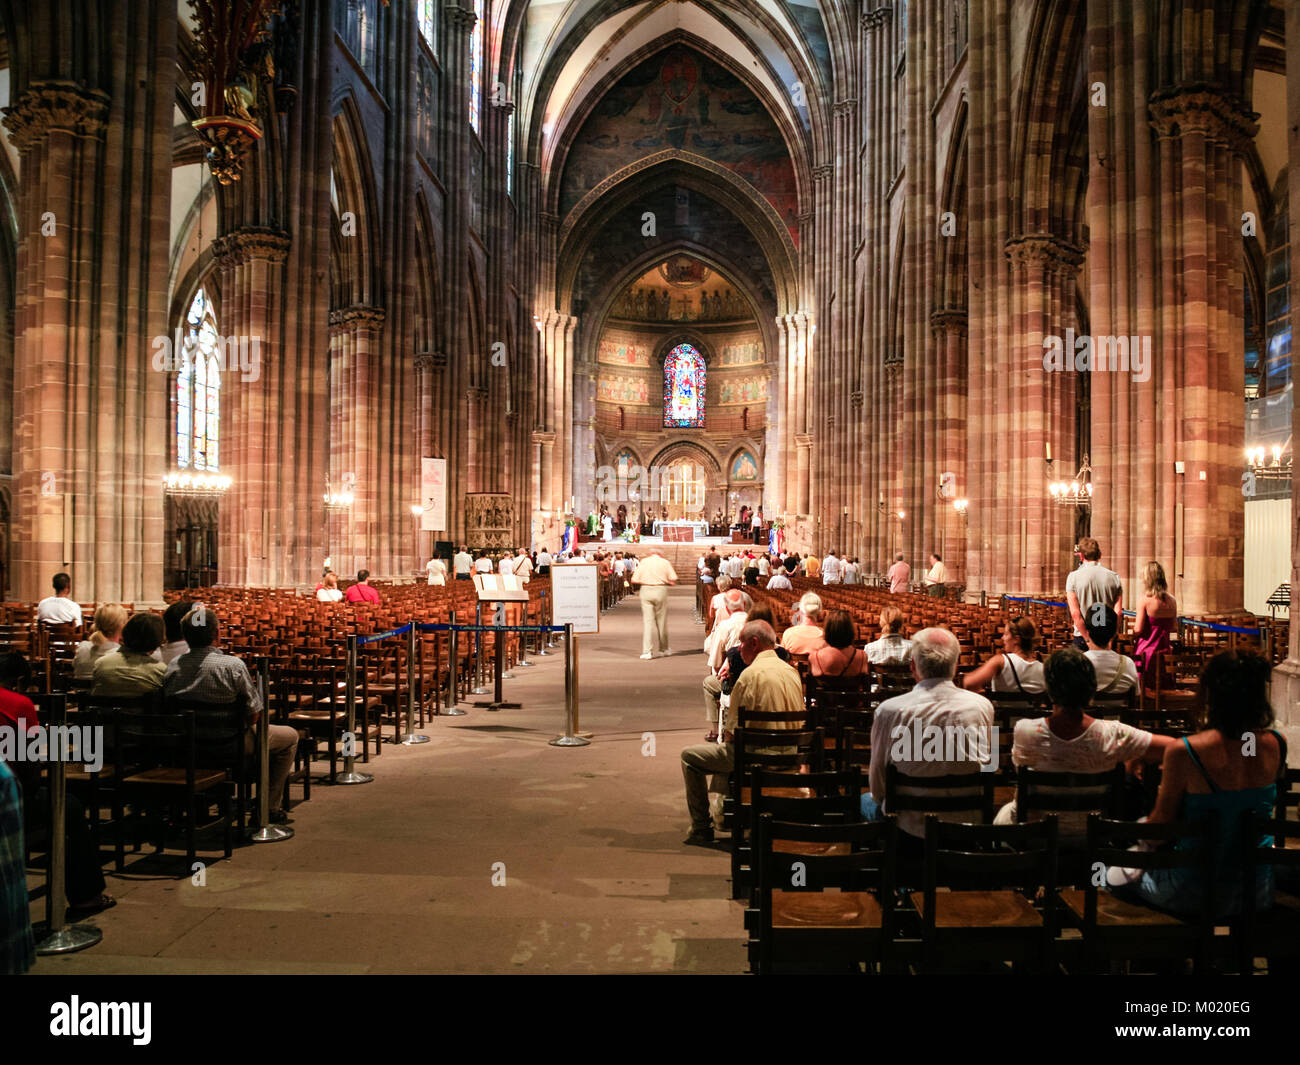 STRASBOURG, FRANCE - JULY 10, 2010: people during church service in Strasbourg Cathedral . Roman Catholic cathedral was built in 1015-1439 years in Ro Stock Photo